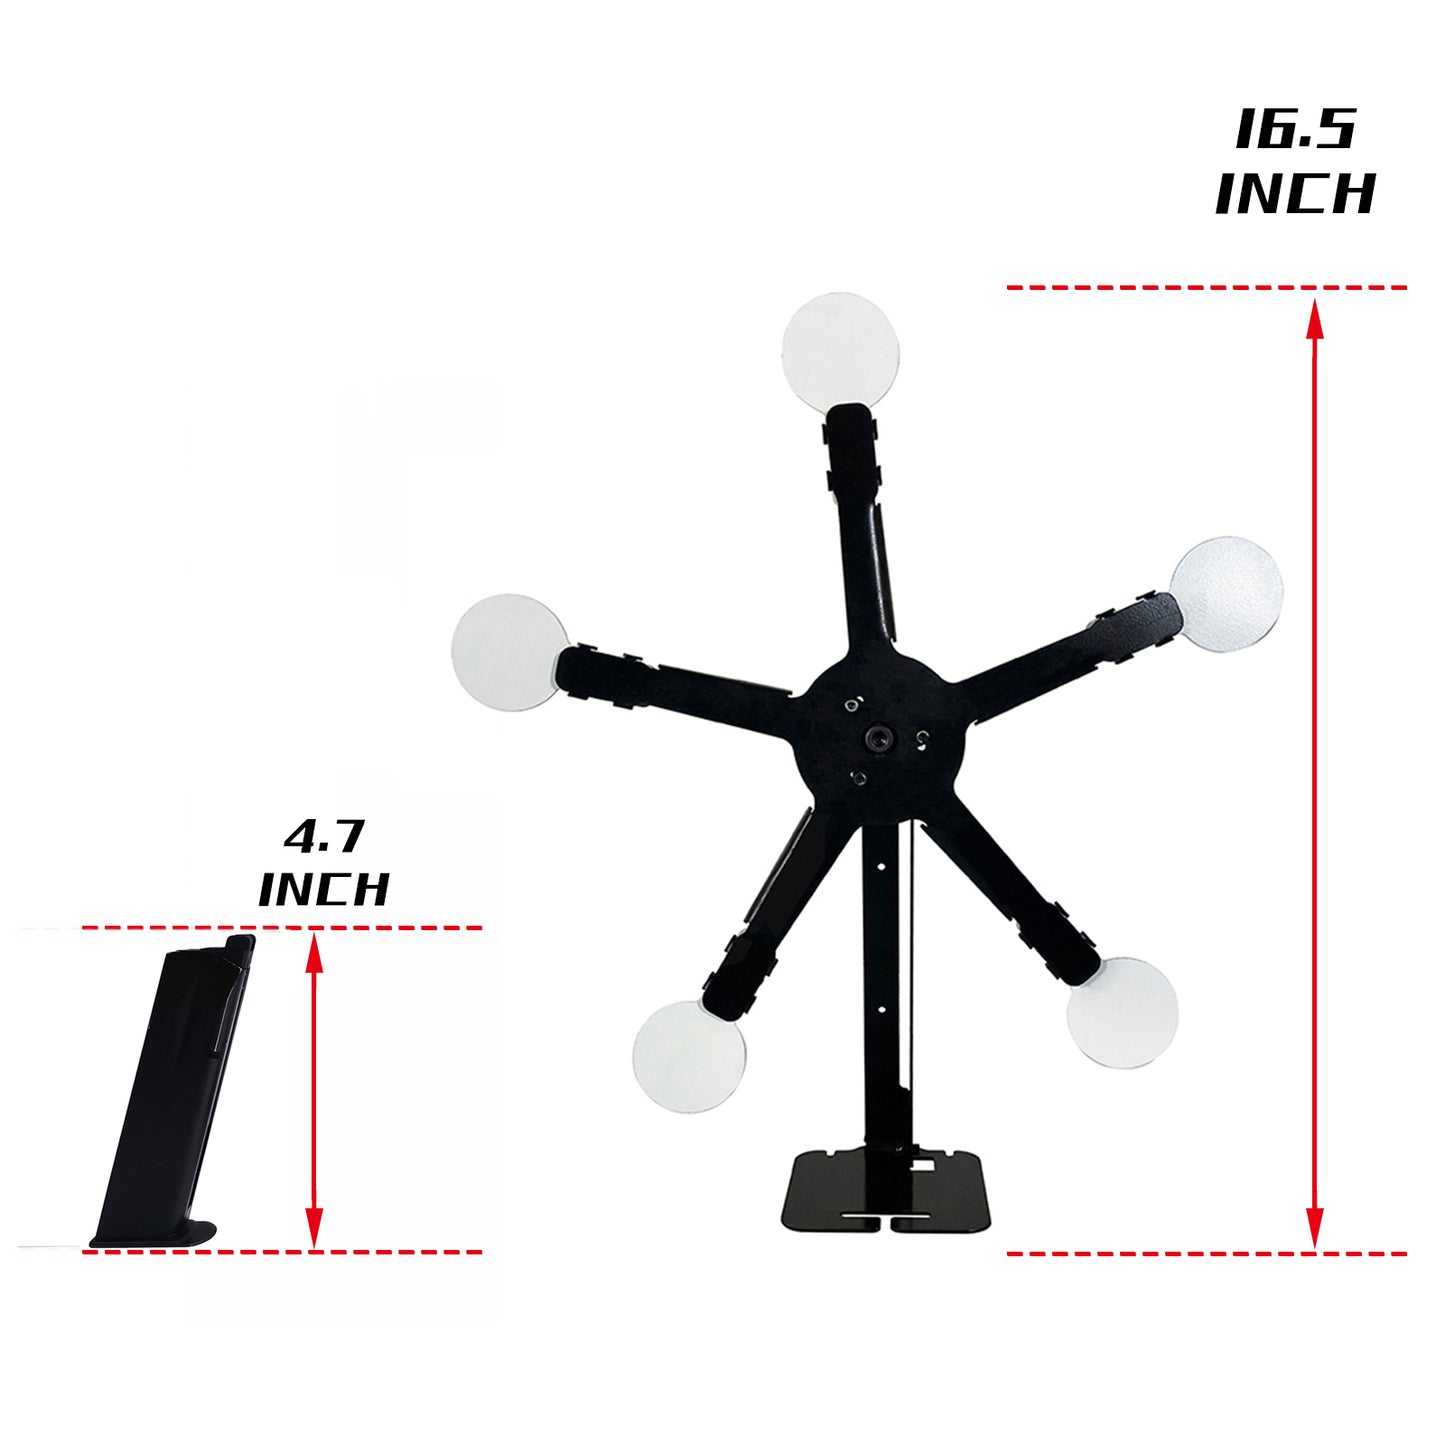 Atflbox Resetting and Rotate The Metal Shooting Target Stand with 5 Steel Plates for Pistol Airsoft BB Guns (Star)